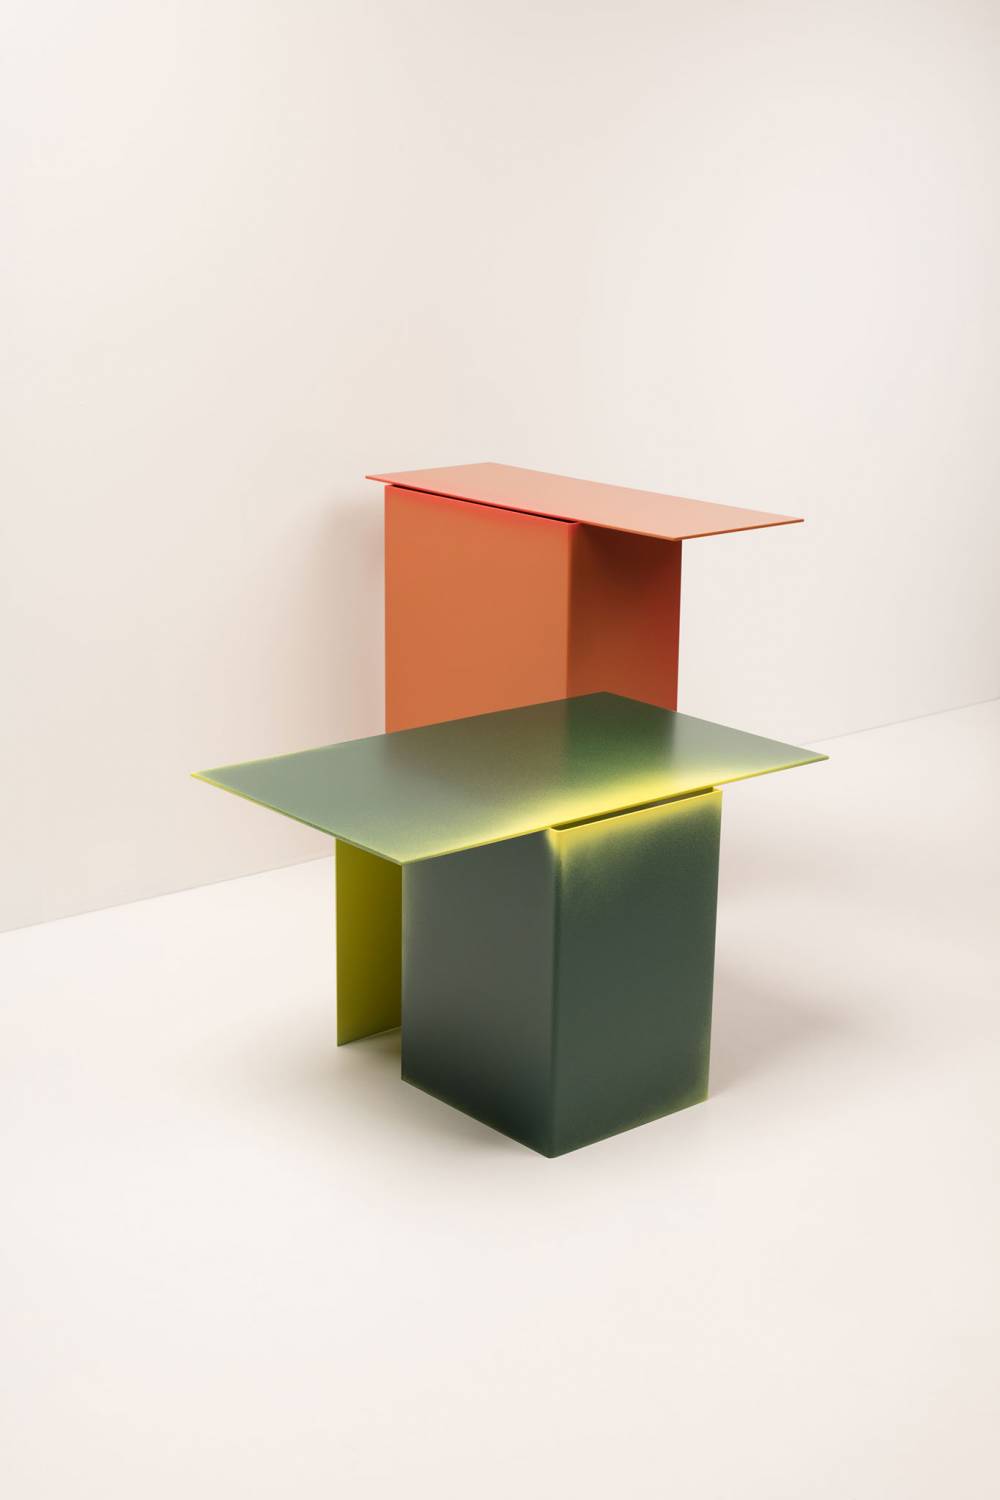 Daze side table by Truly Truly | Flodeau.com